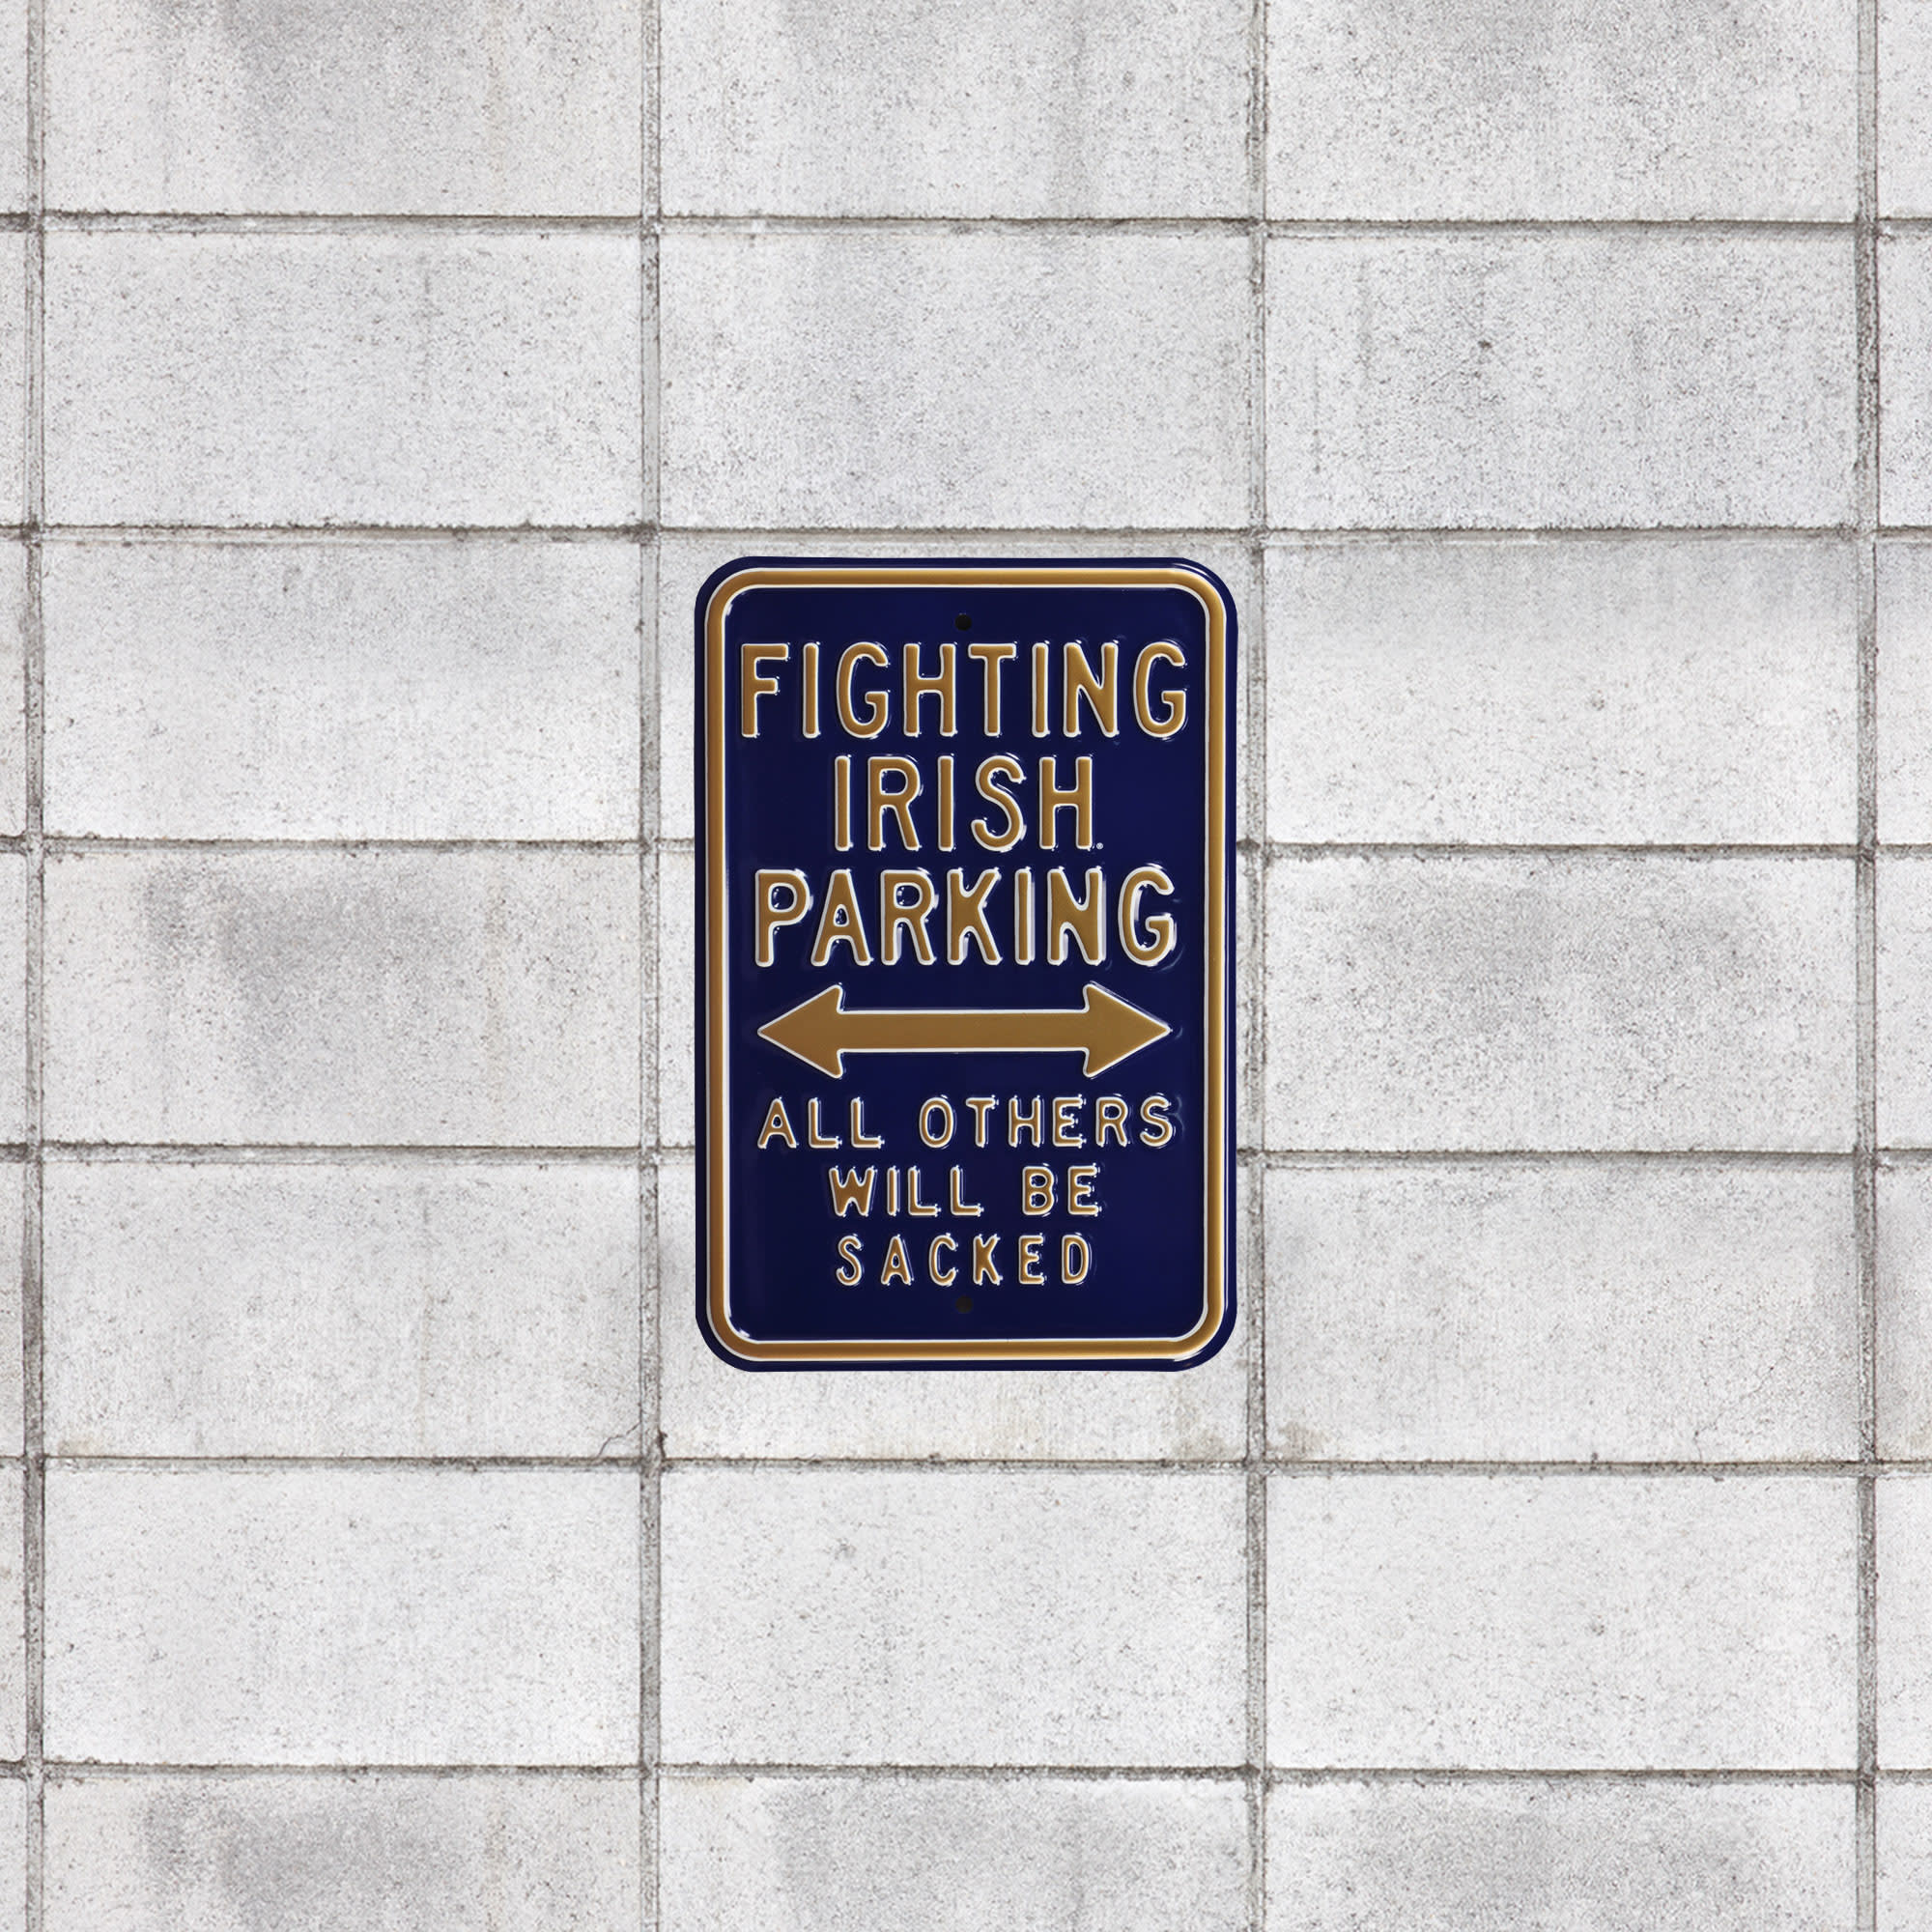 Notre Dame Fighting Irish: Fighting Irish Parking - Officially Licensed Metal Street Sign 18.0"W x 12.0"H by Fathead | 100% Stee